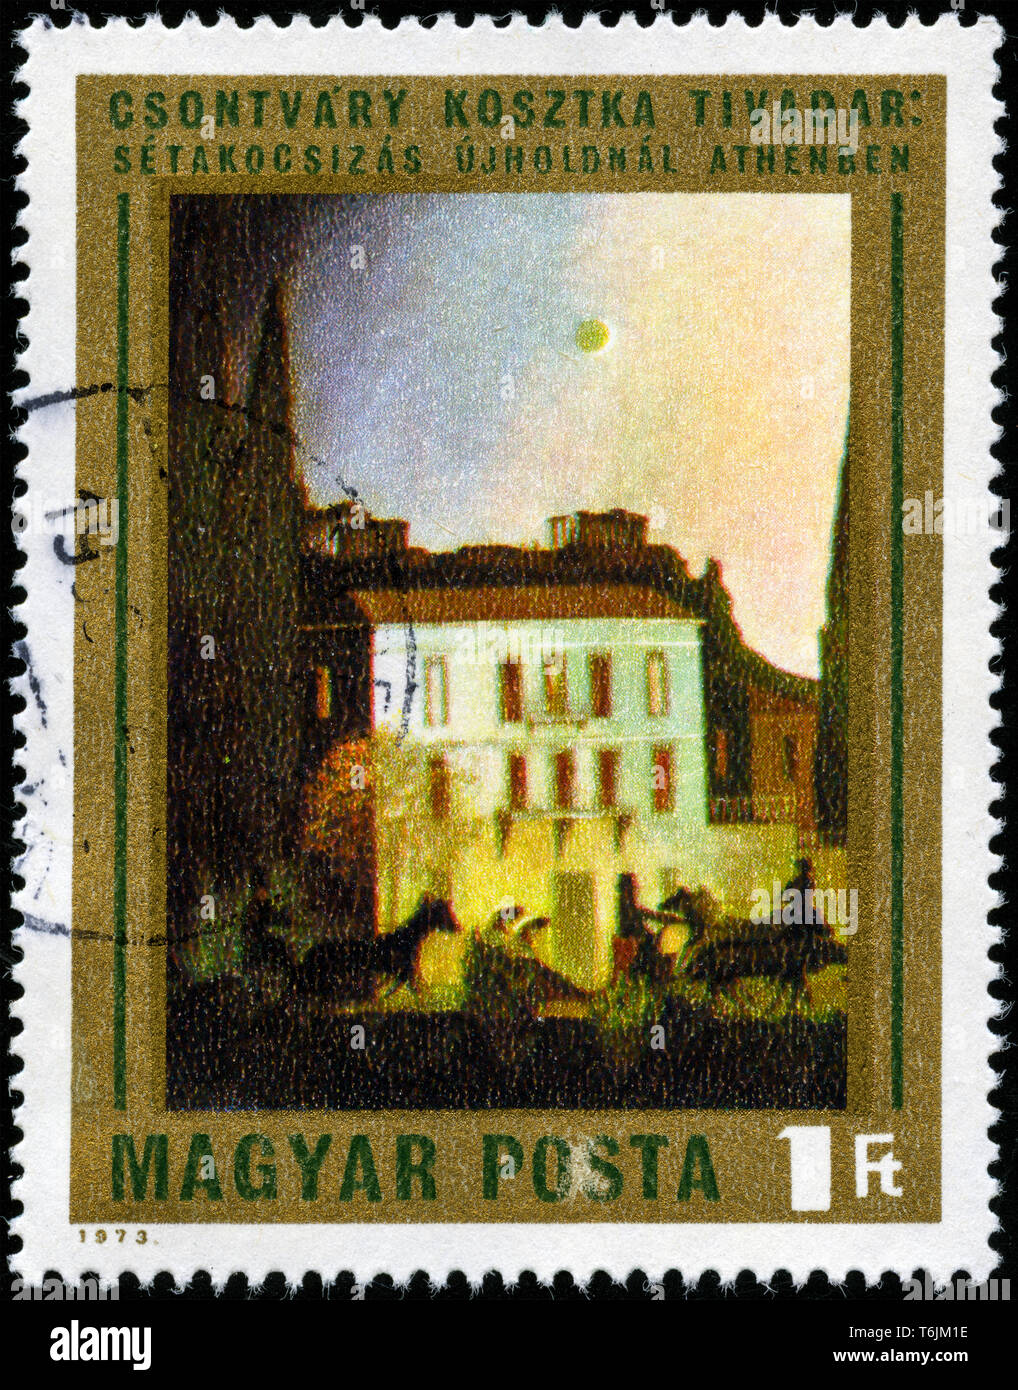 Postage stamp from Hungary in the Paintings by Tivadar Csontváry Kosztkaseries issued in 1973 Stock Photo